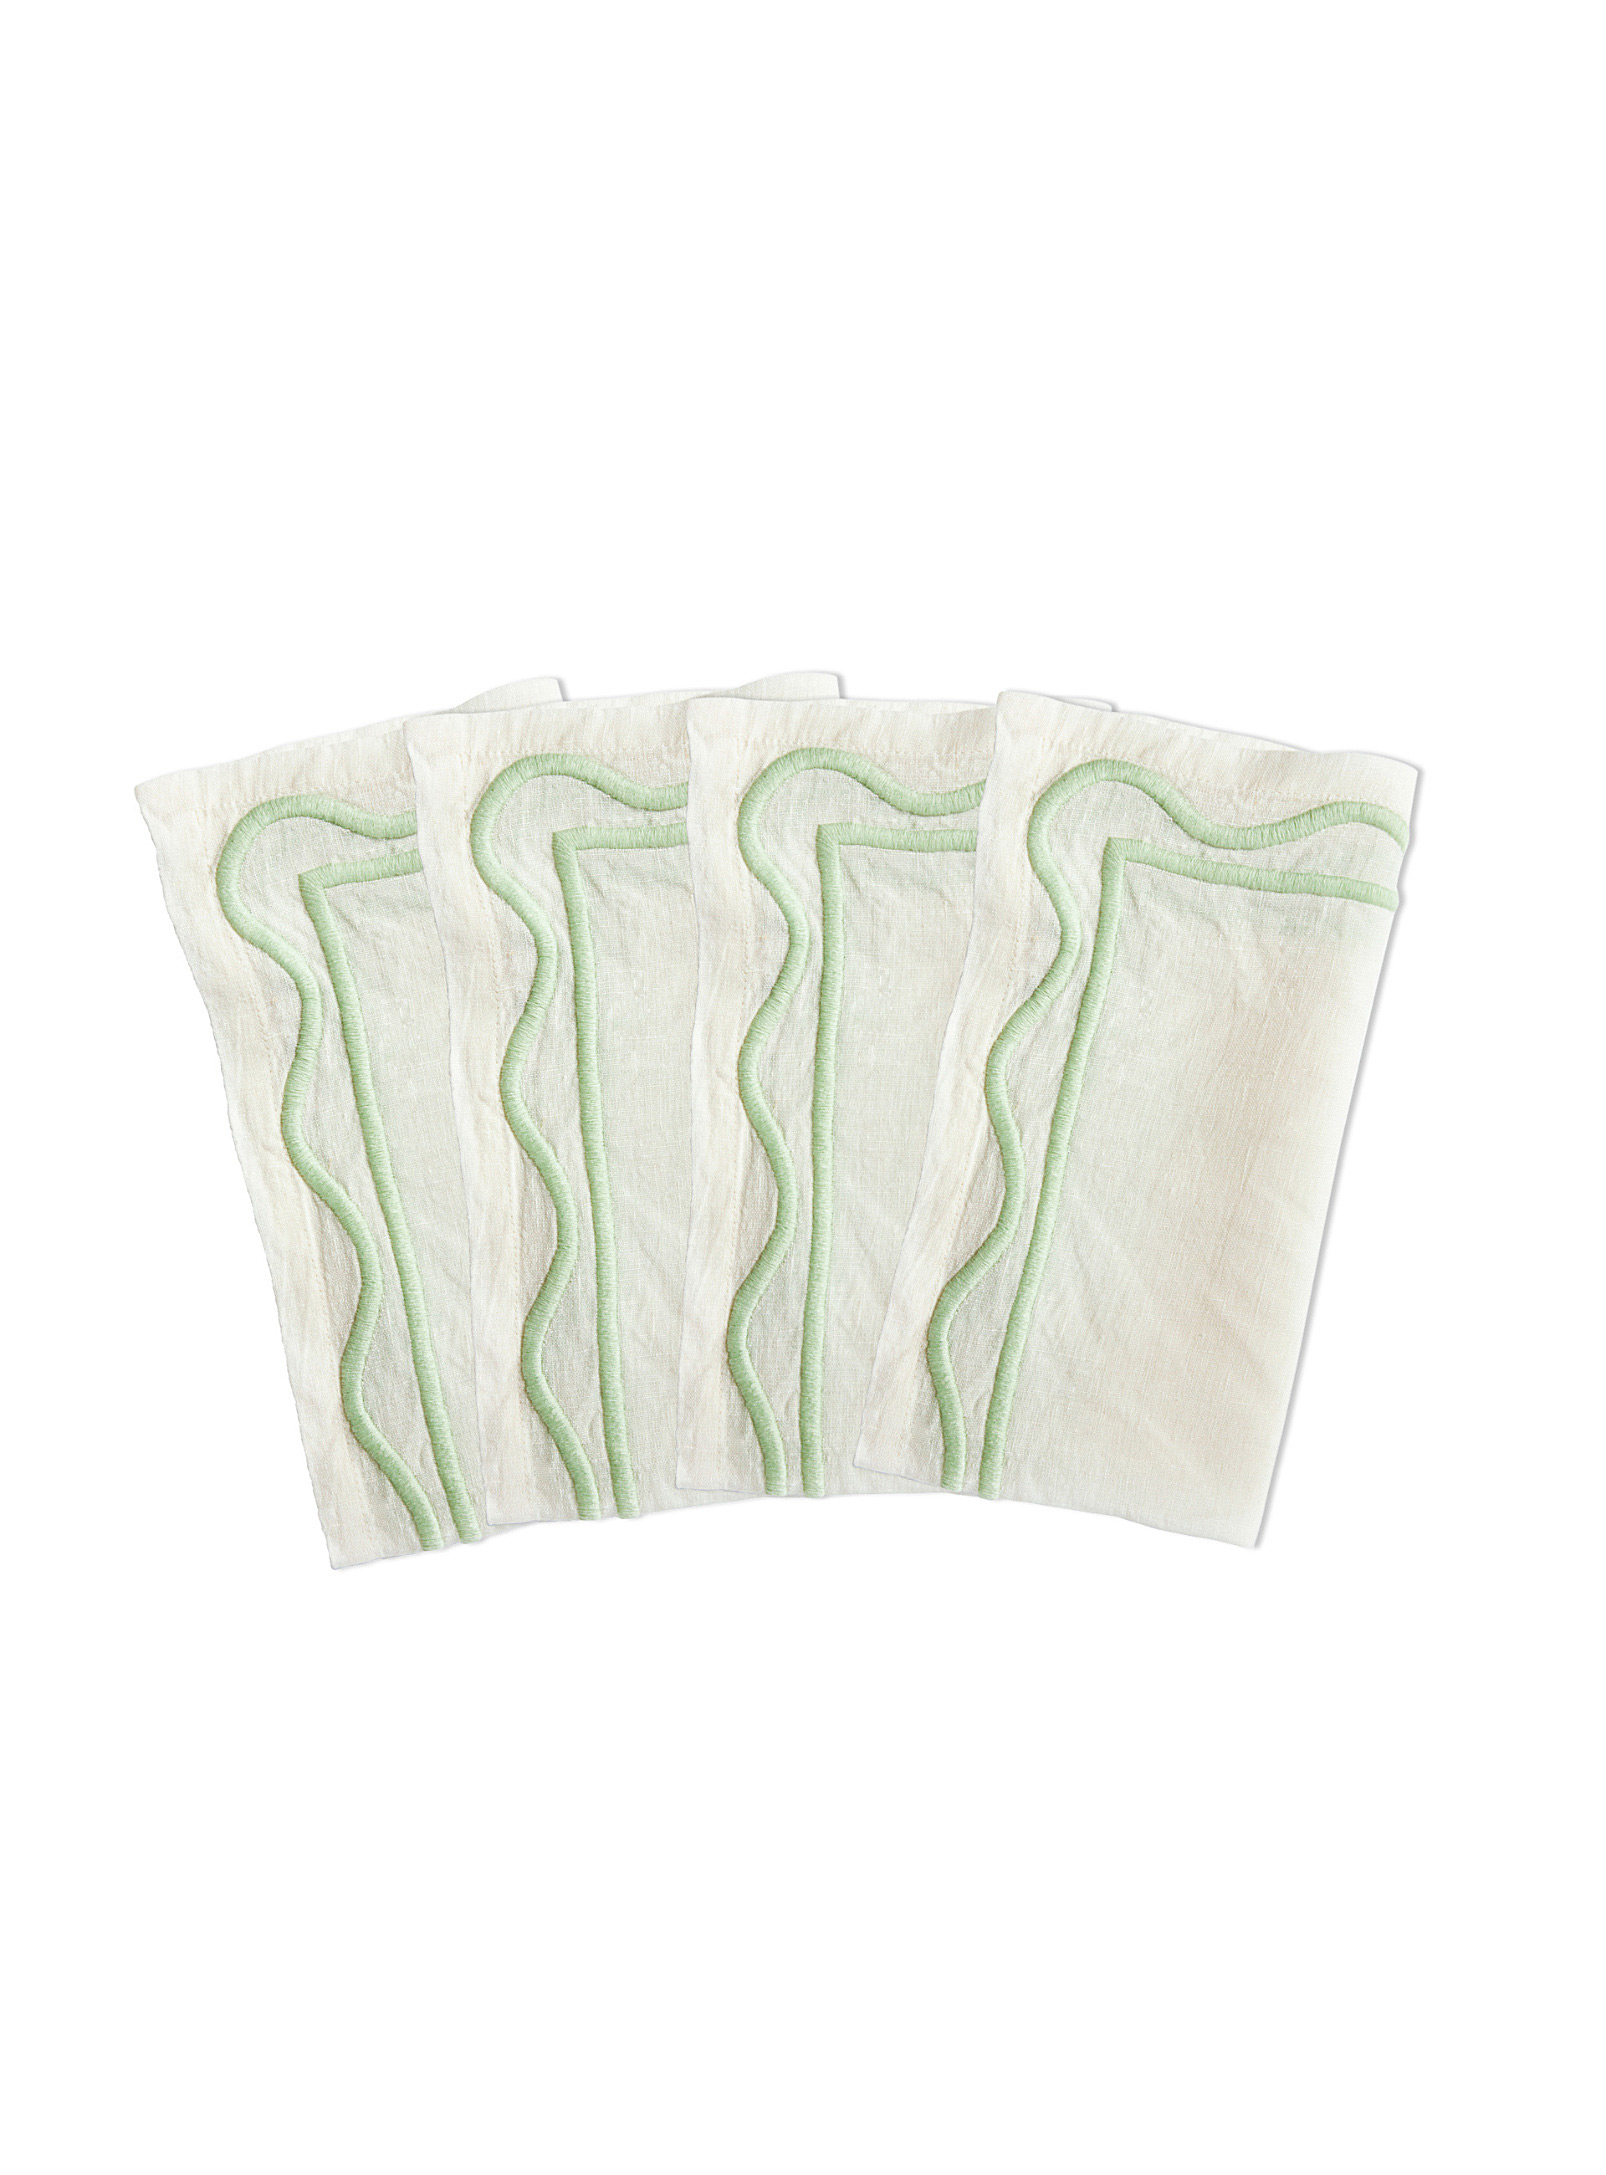 Misette Scalloped Embroidery Linen Napkins Set Of 4 In Lime Green